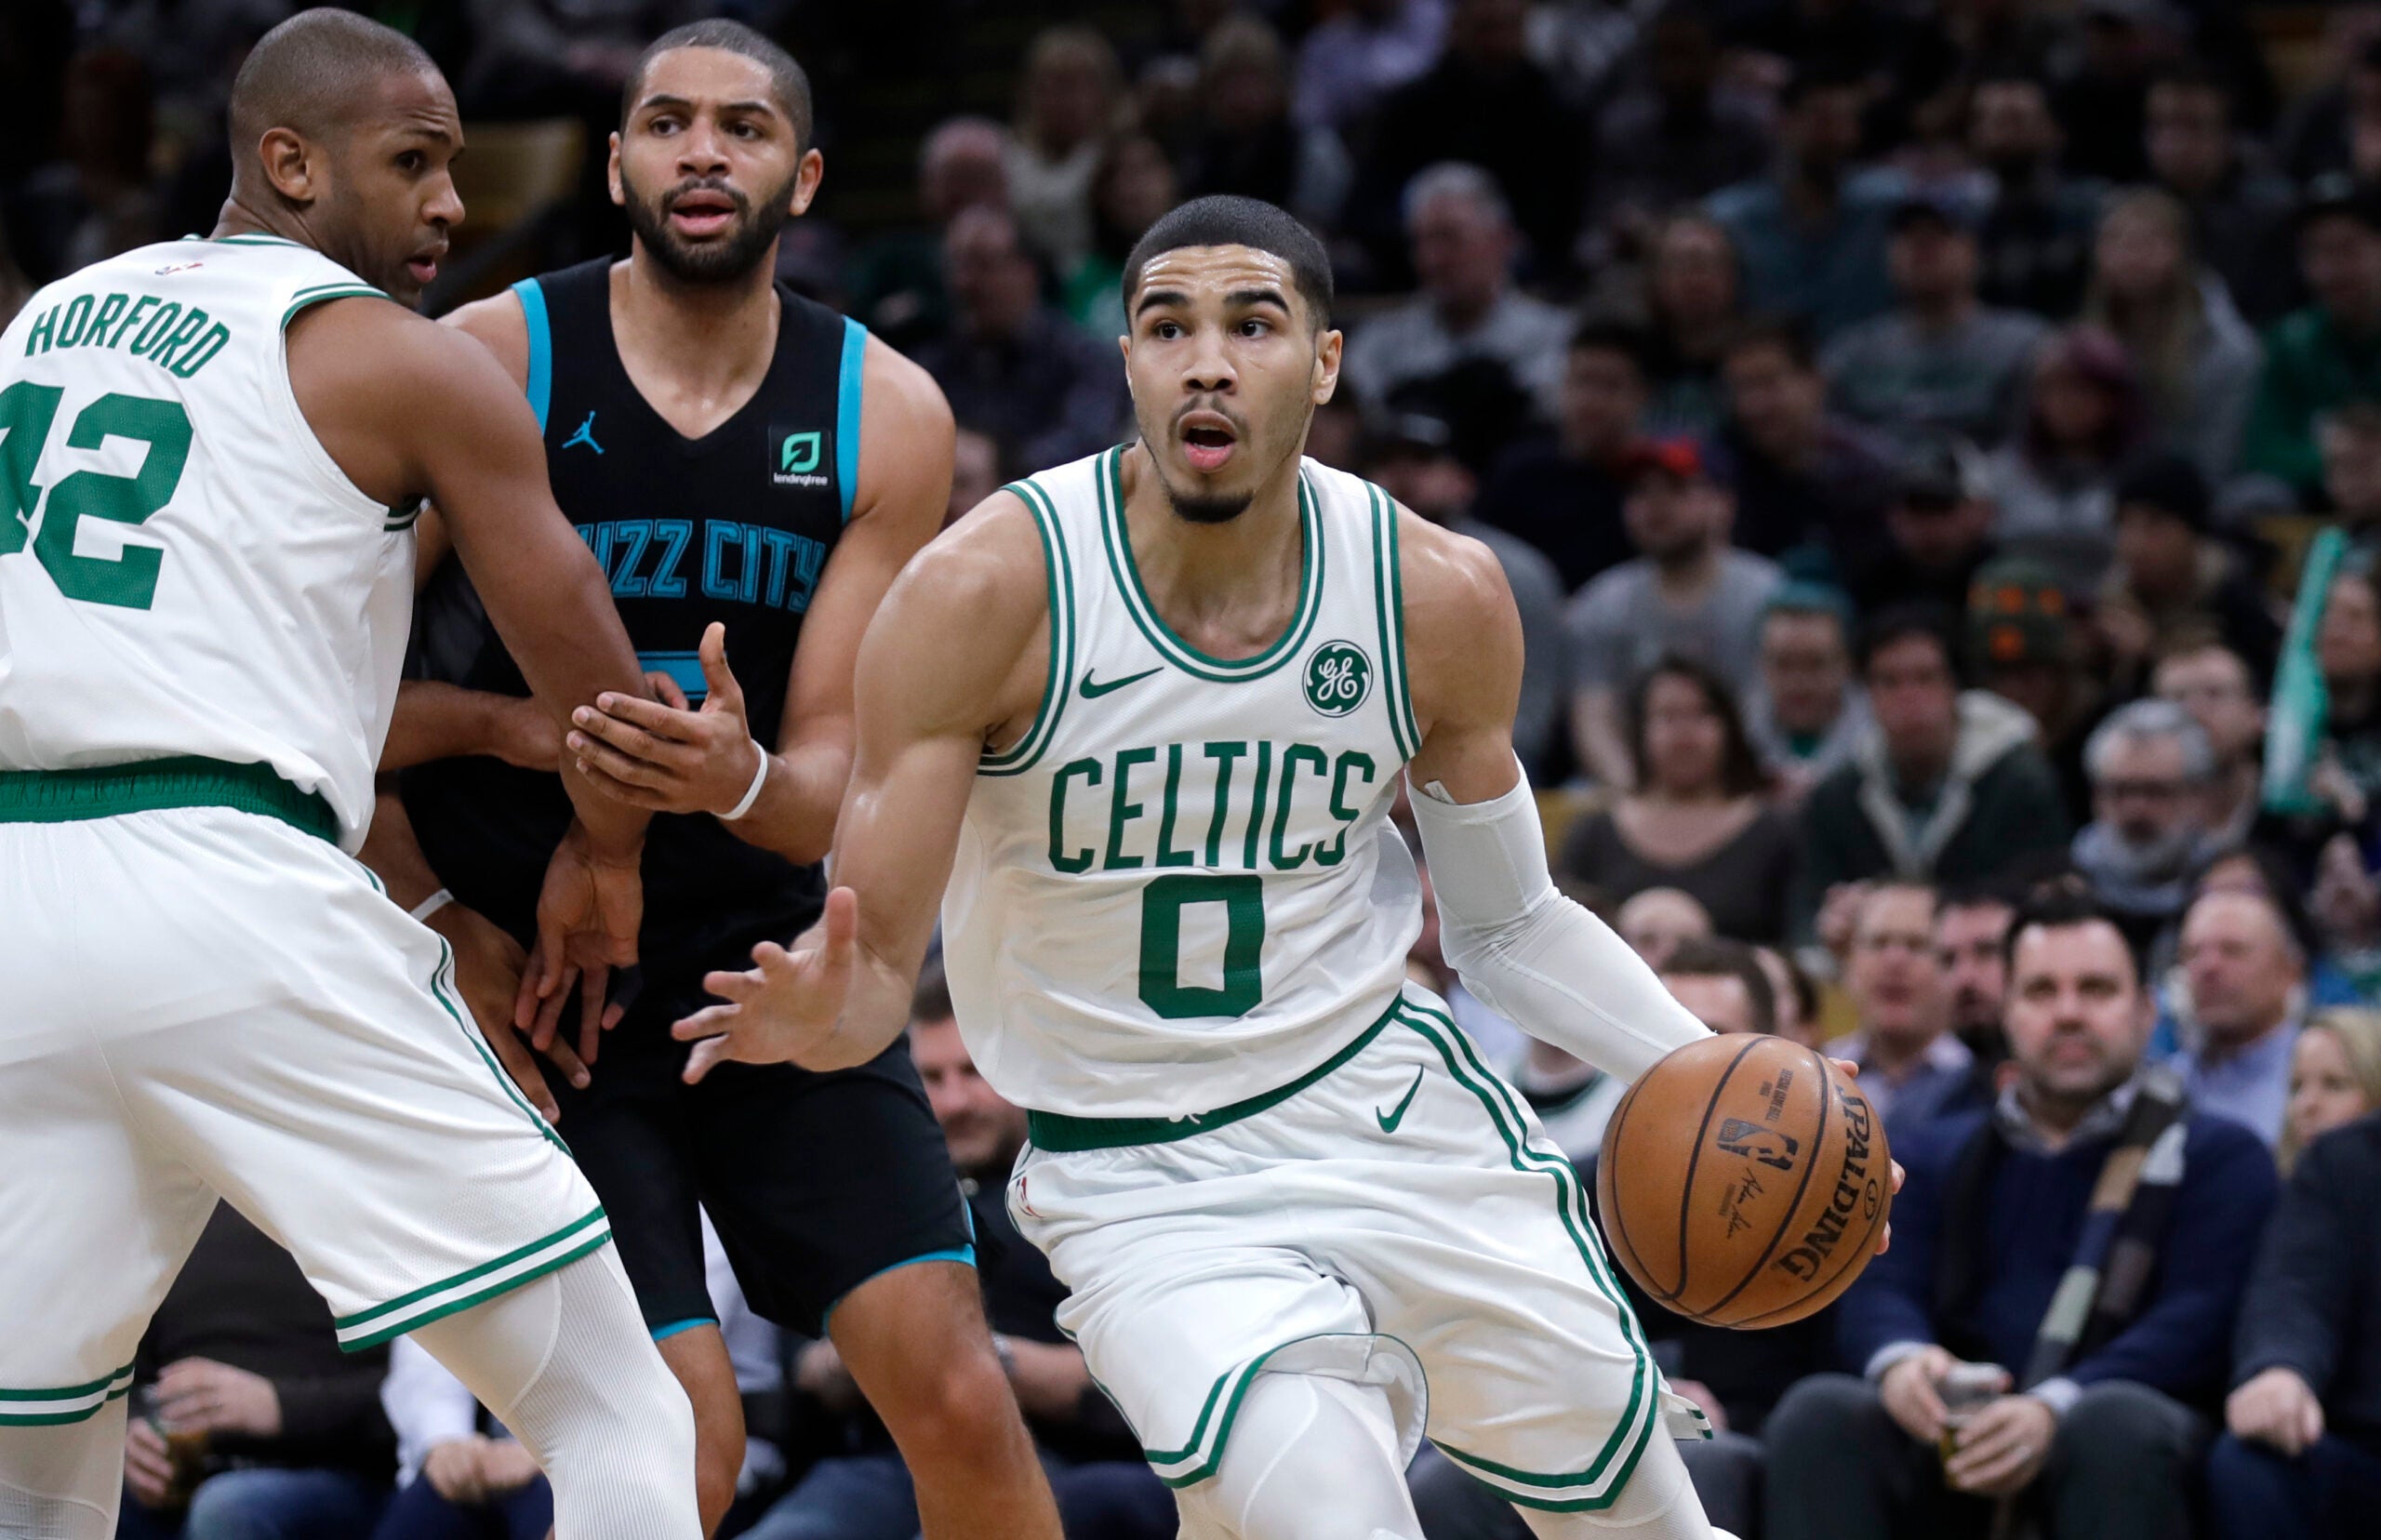 Sore shoulder will keep Jayson Tatum out of Clippers game